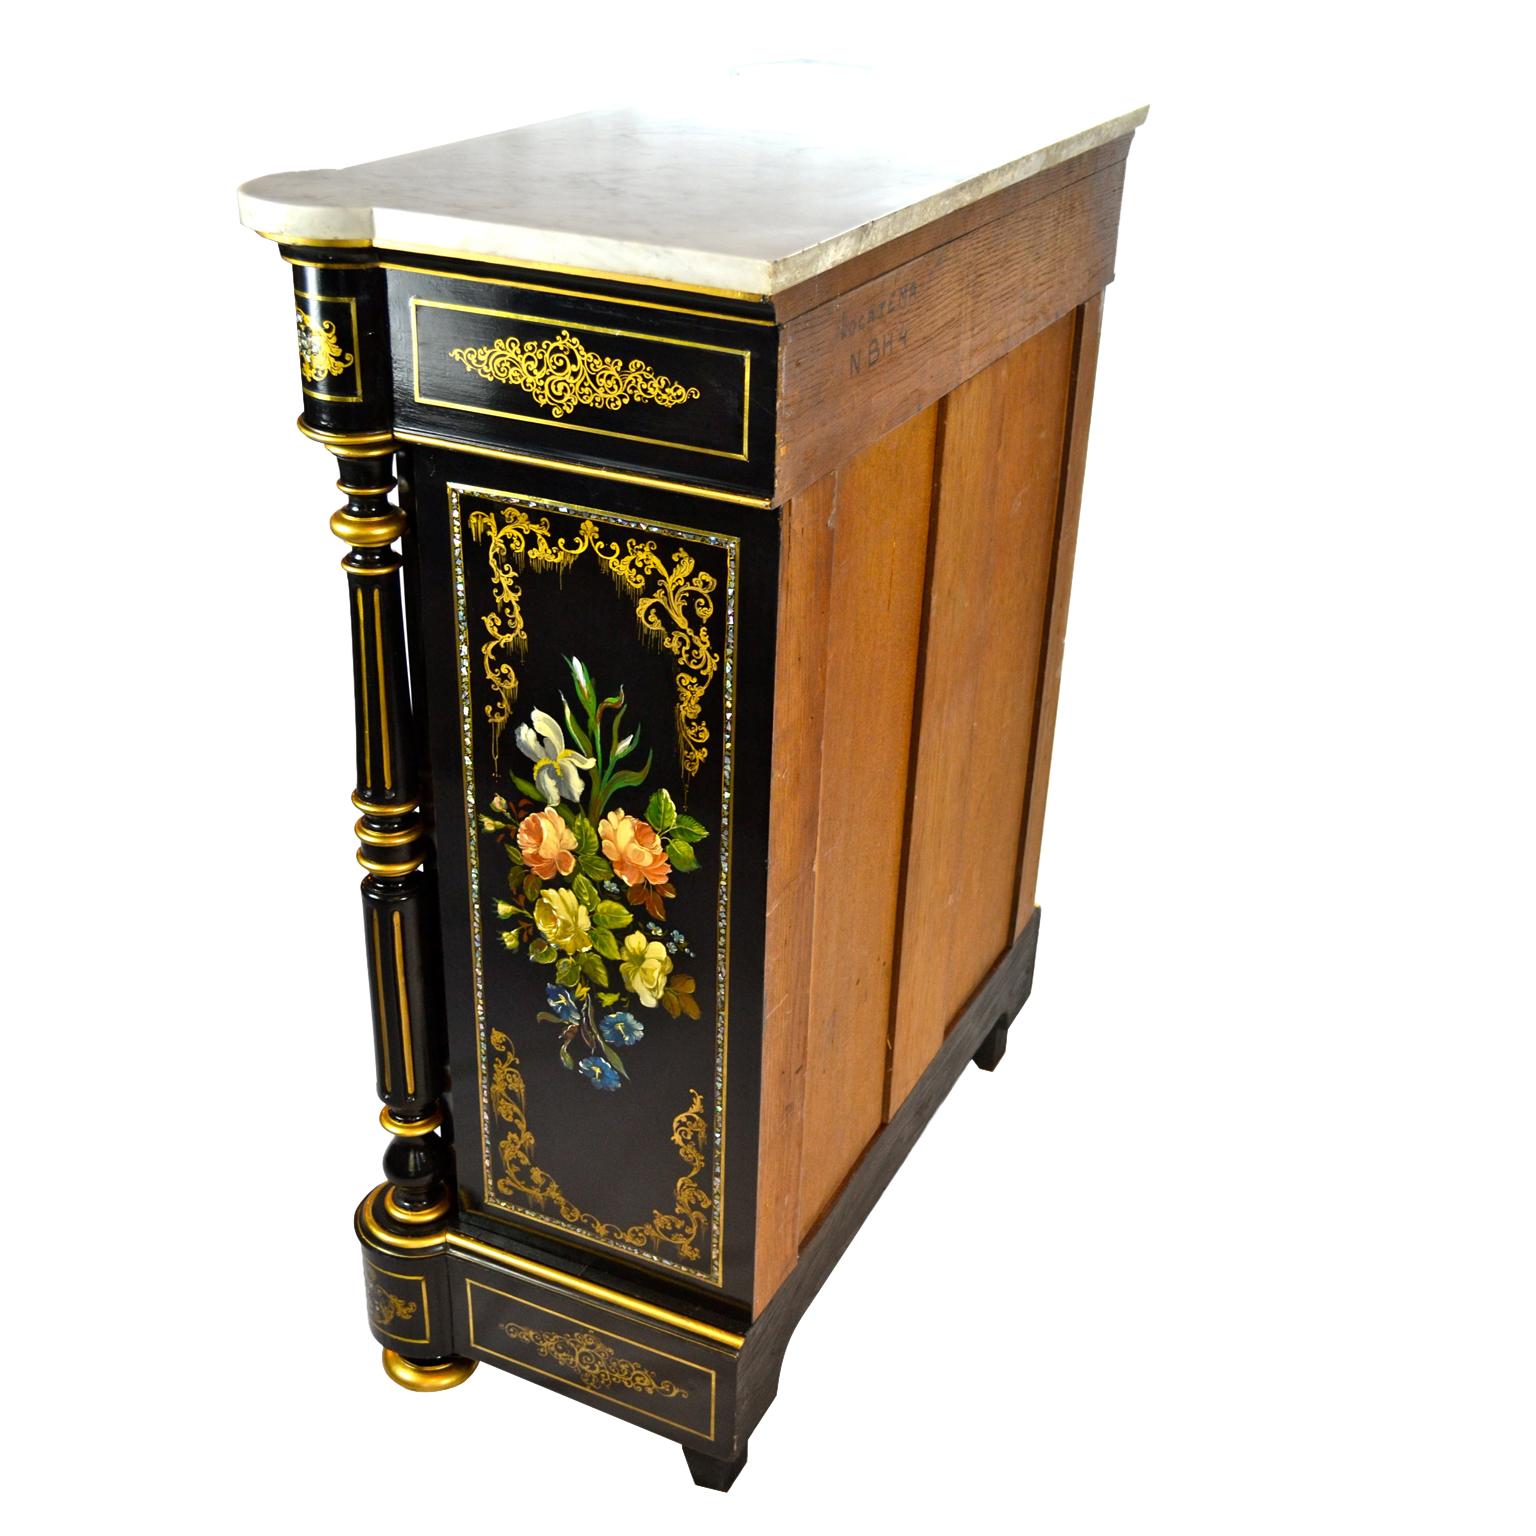 A Napoleon III ebonized cabinet with front and sides decorated with hand painted floral medallions. The cabinet has turned columns to each side with gilded decoration, and is further decorated with intricately painted gilding, a single lockable door